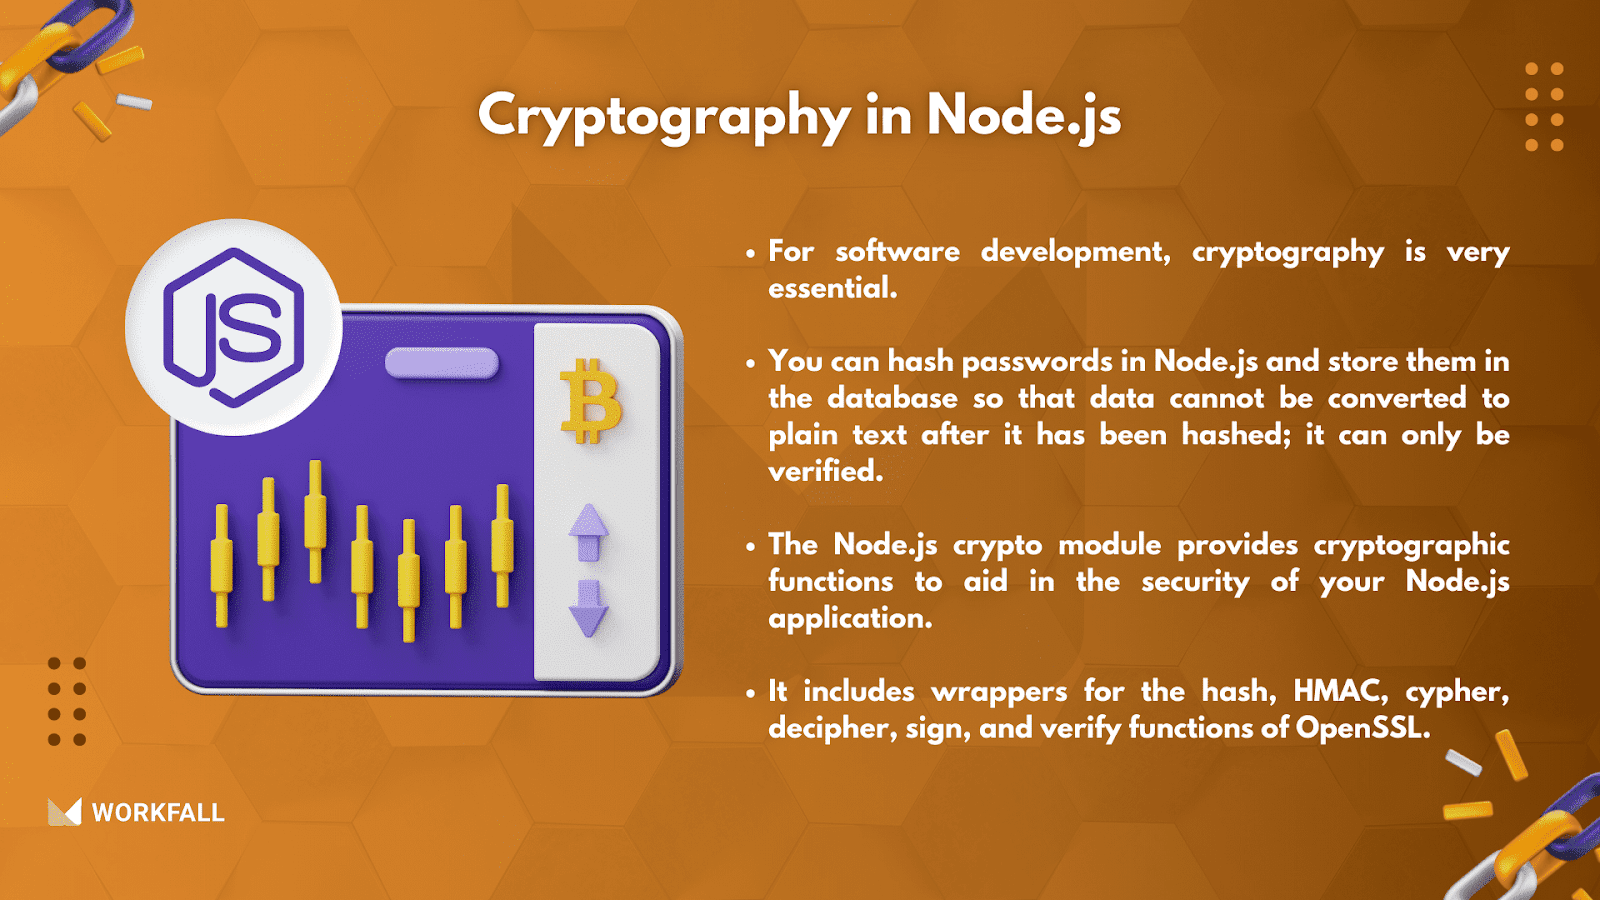 Cryptography in Node.js